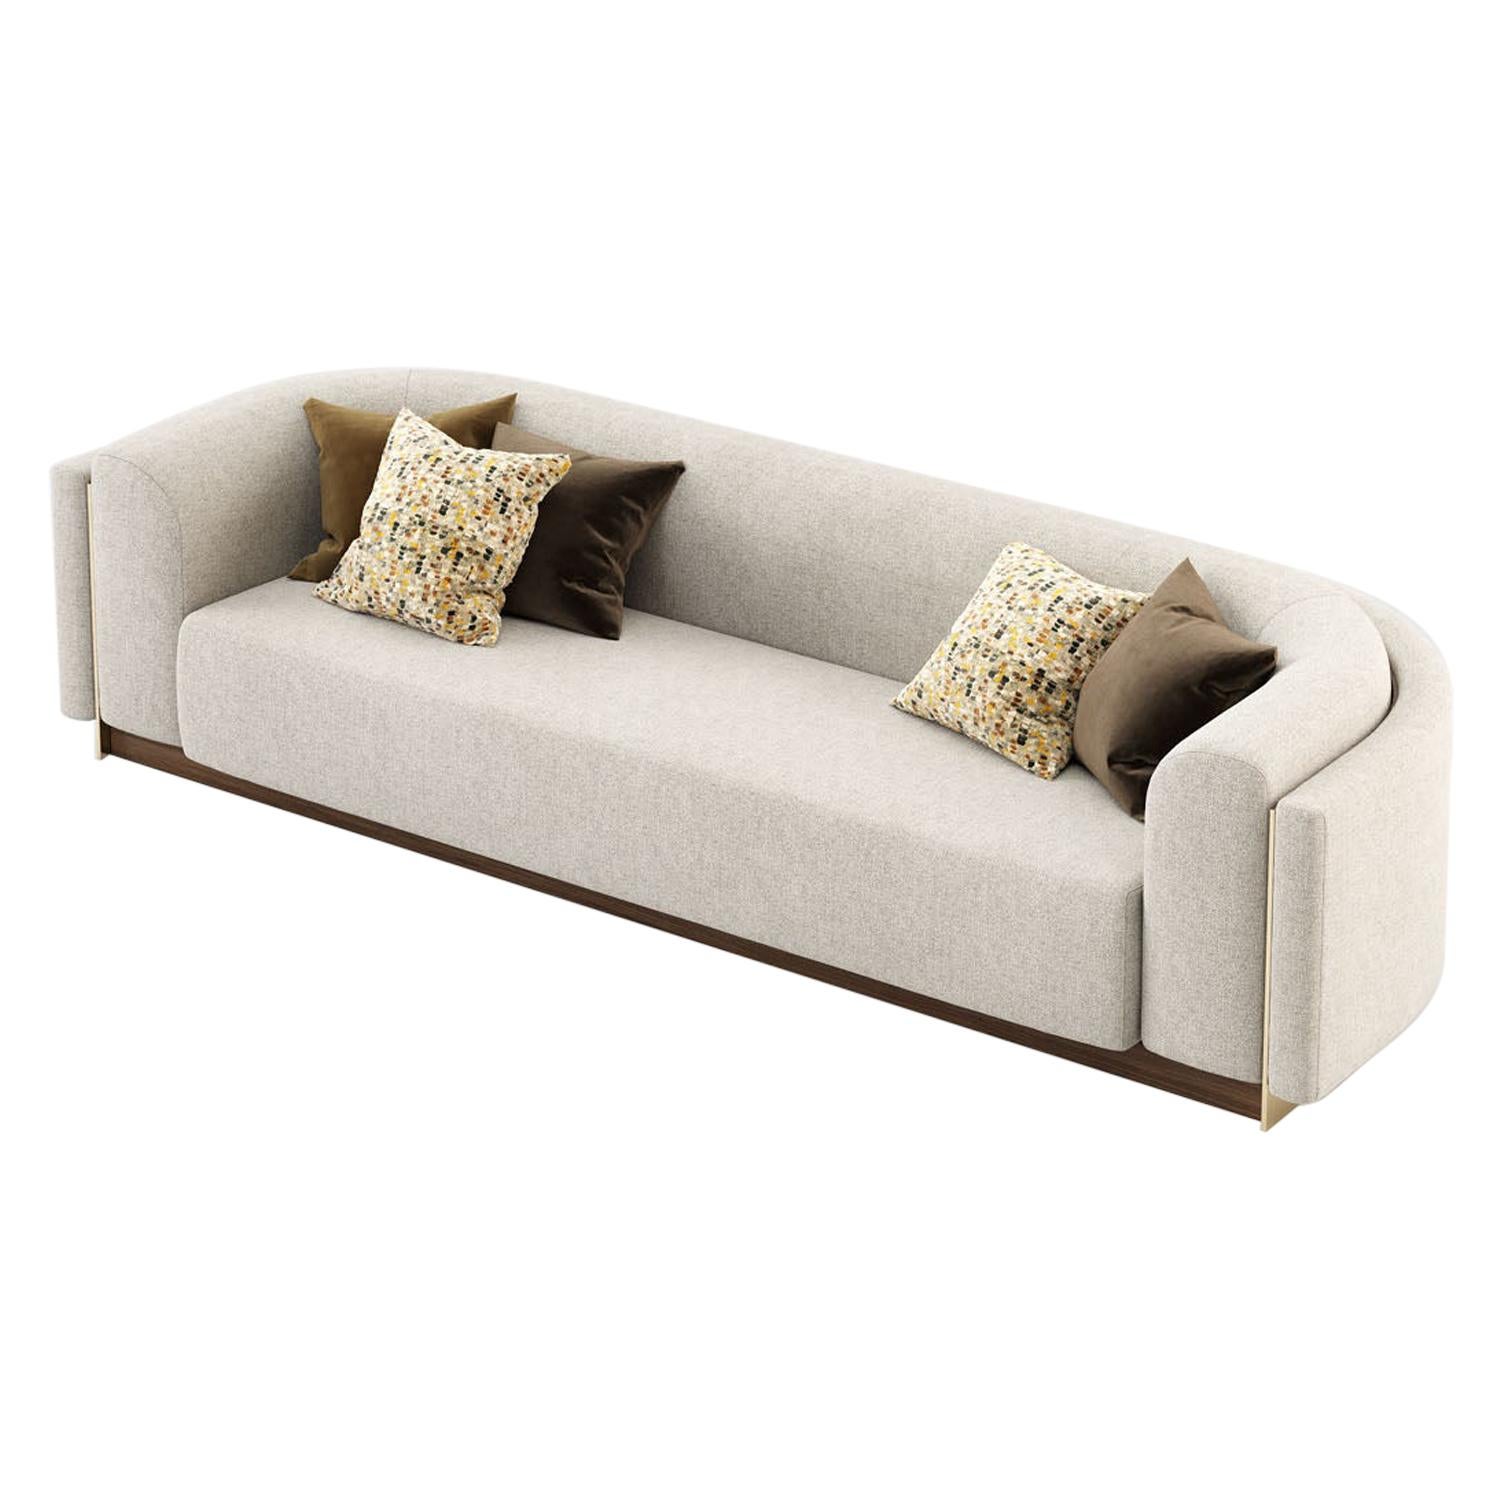 Contemporary Portuguese sofa, with a wooden base and customizable fabric